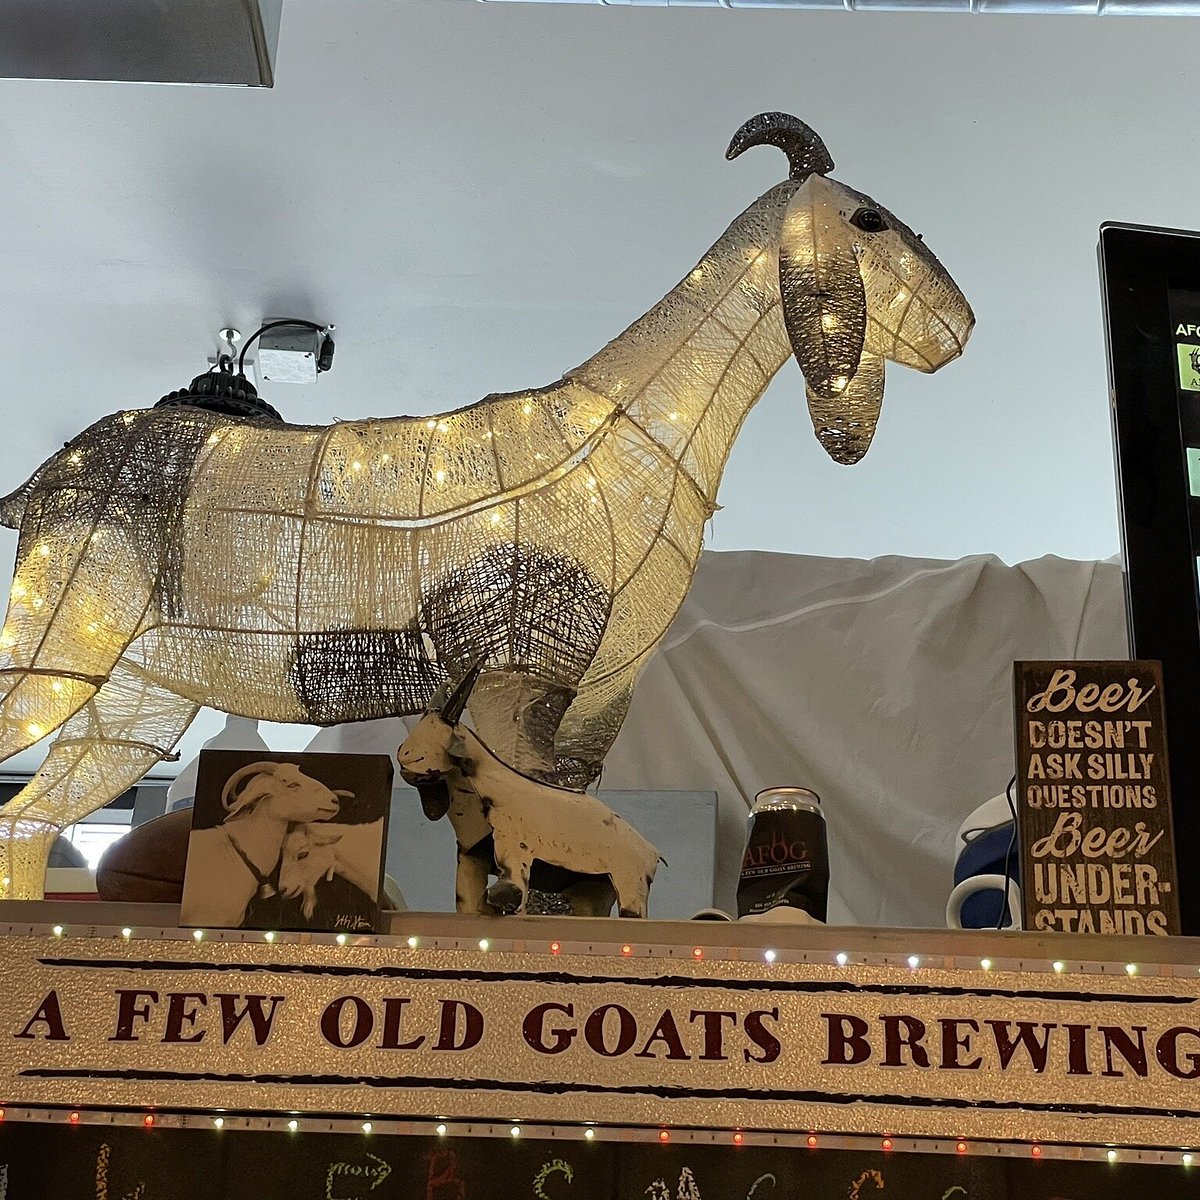 A FEW OLD GOATS BREWING: All You Need to Know BEFORE You Go (with